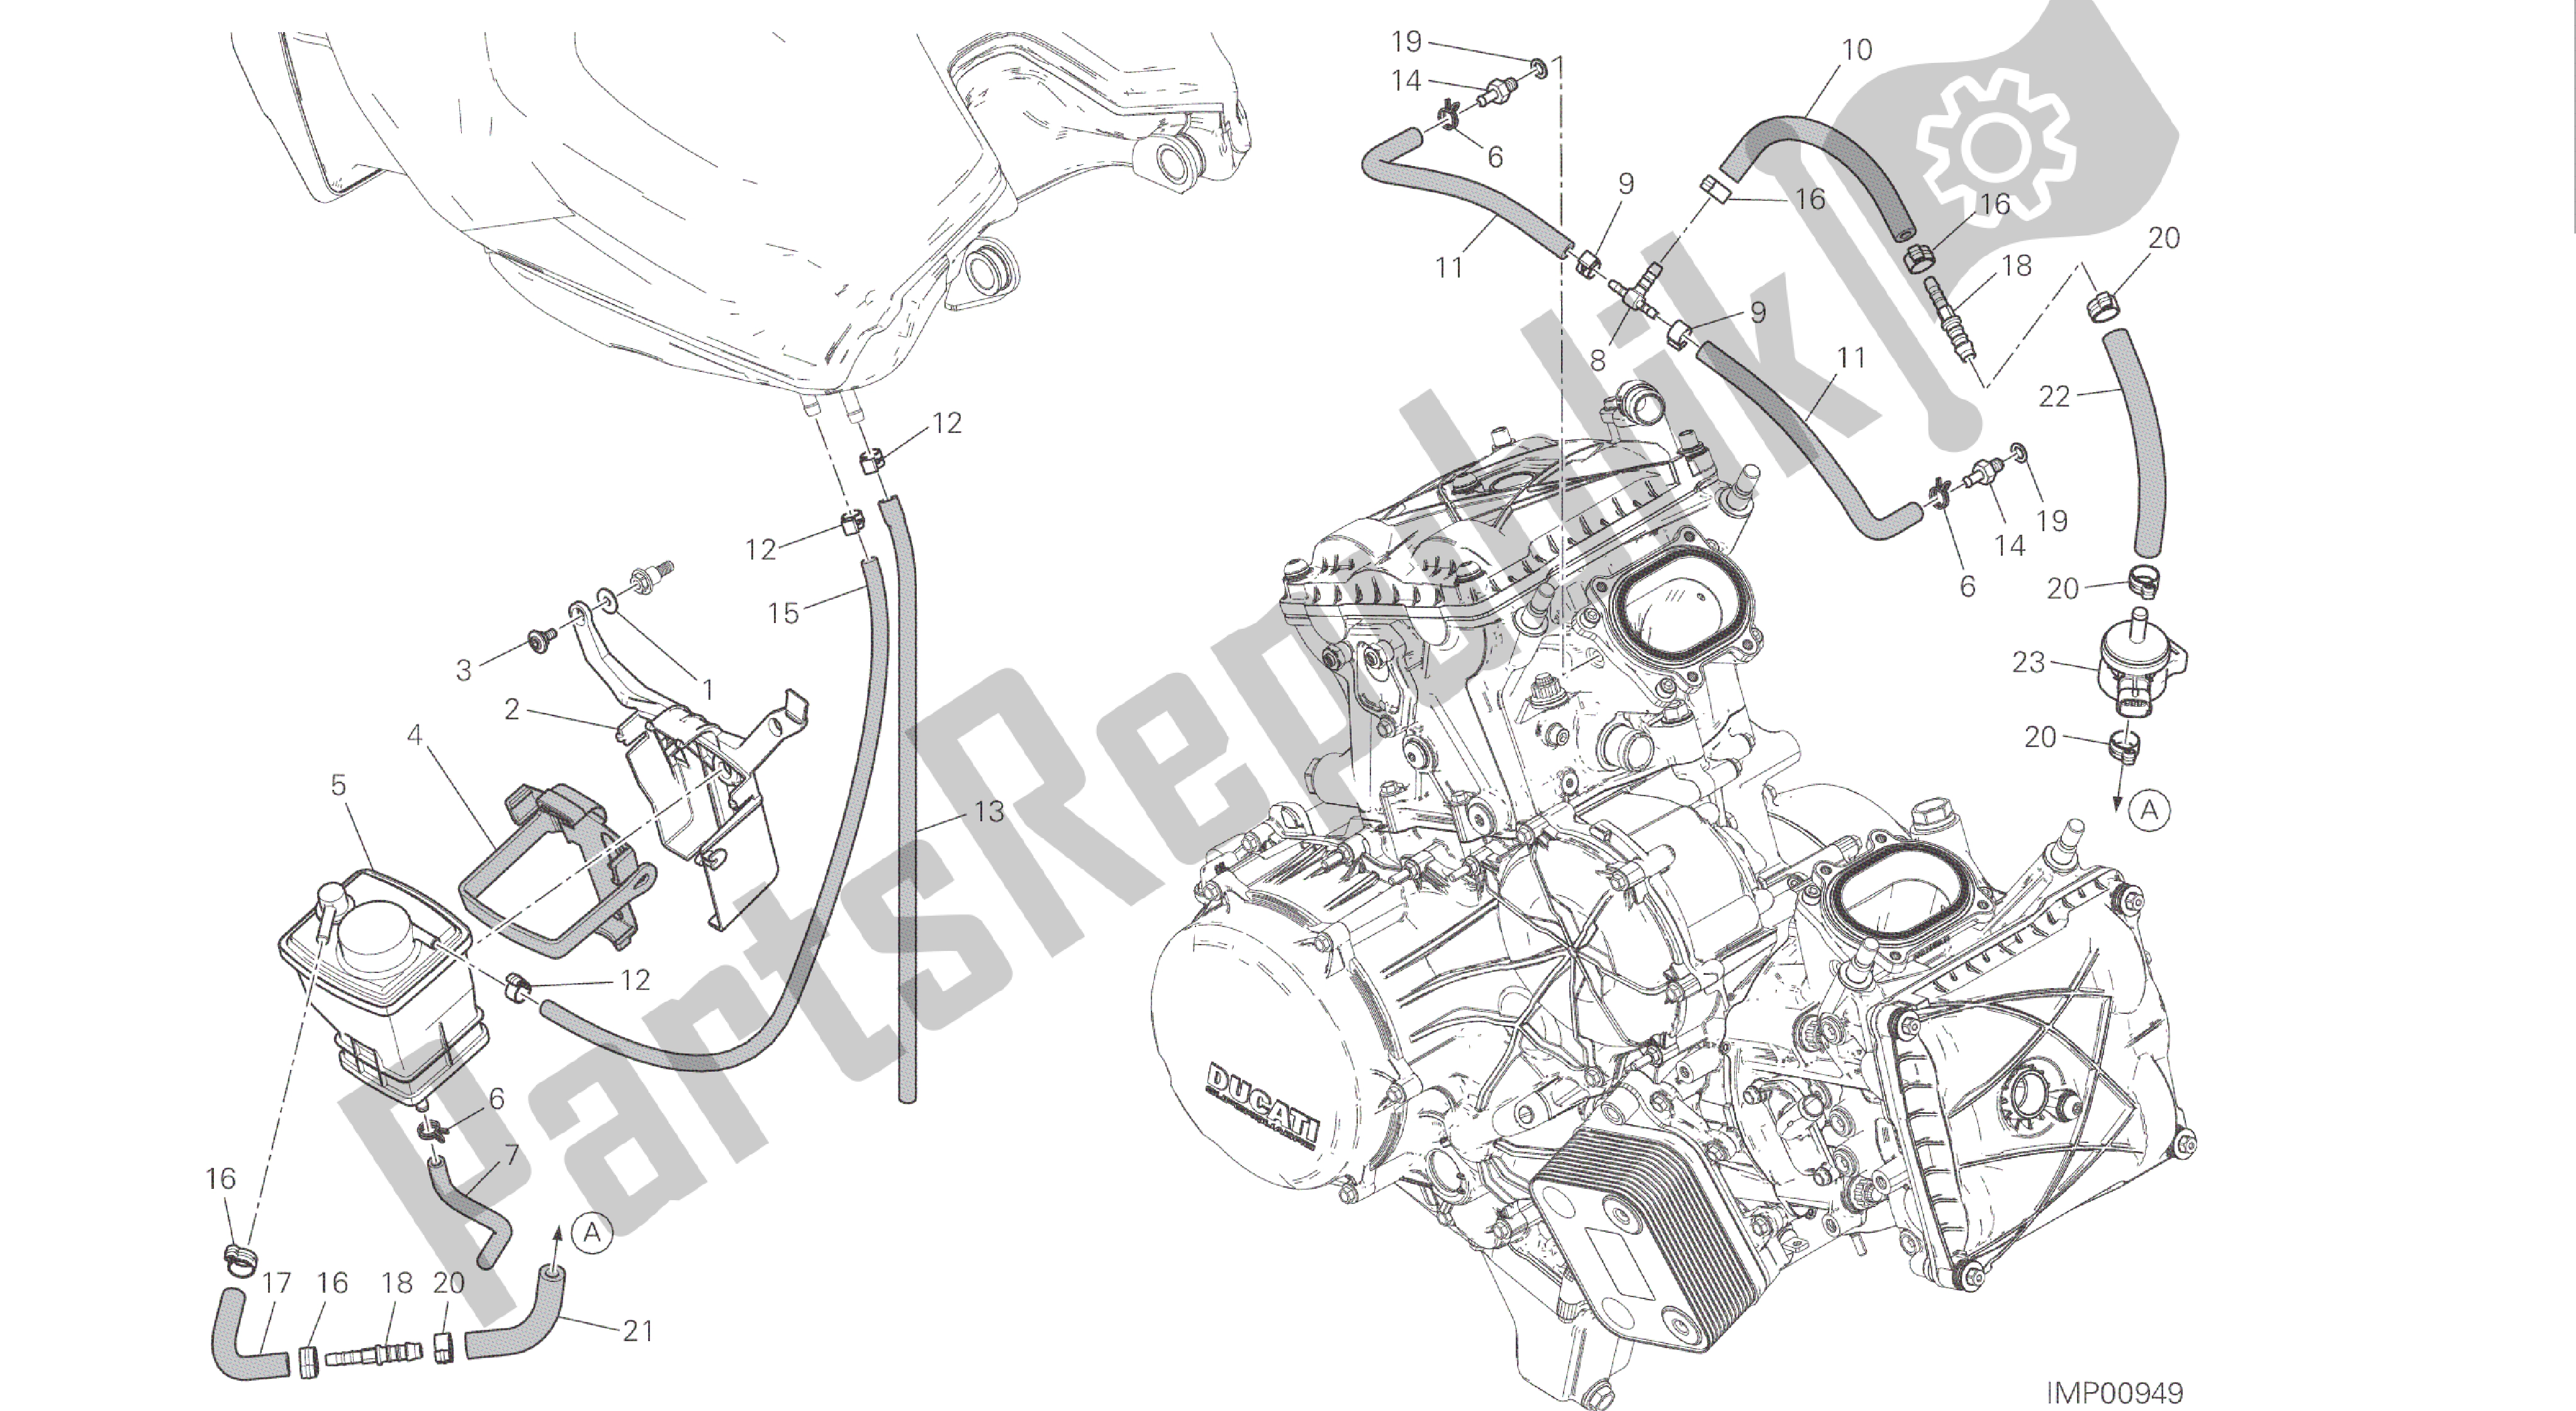 All parts for the Drawing 035 - Canister Filter [mod:1299s;xst:twn]group Frame of the Ducati Panigale S ABS 1299 2016